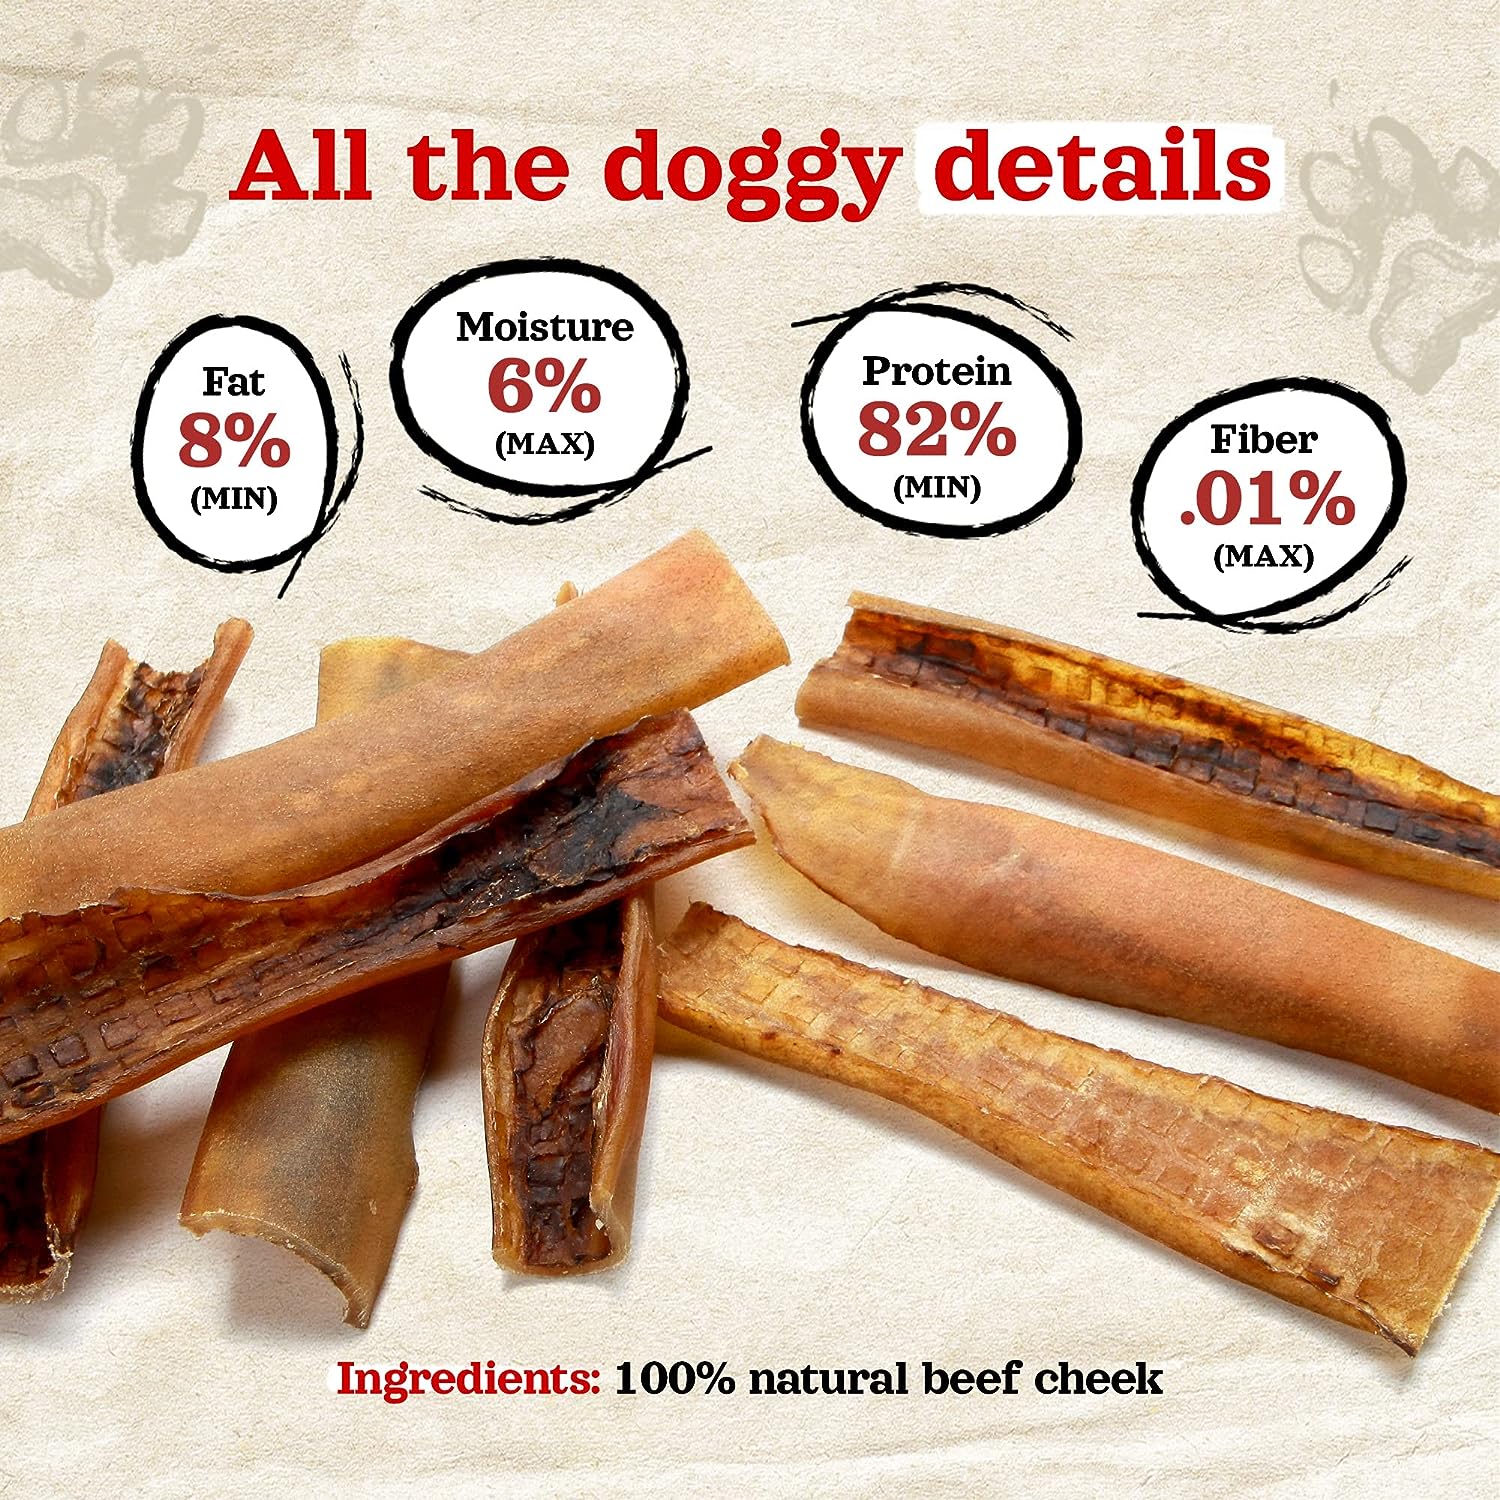 Natural Farm Bully Chips (9-12 Inch, 8 Oz.), Digestible Beef Cheek from Grass-Fed Cows, Non-GMO, Grain-Free, Natural Long-Lasting Dog Chews for Small, Medium & Large Dogs, Great Rawhide Alternative : Pet Supplies